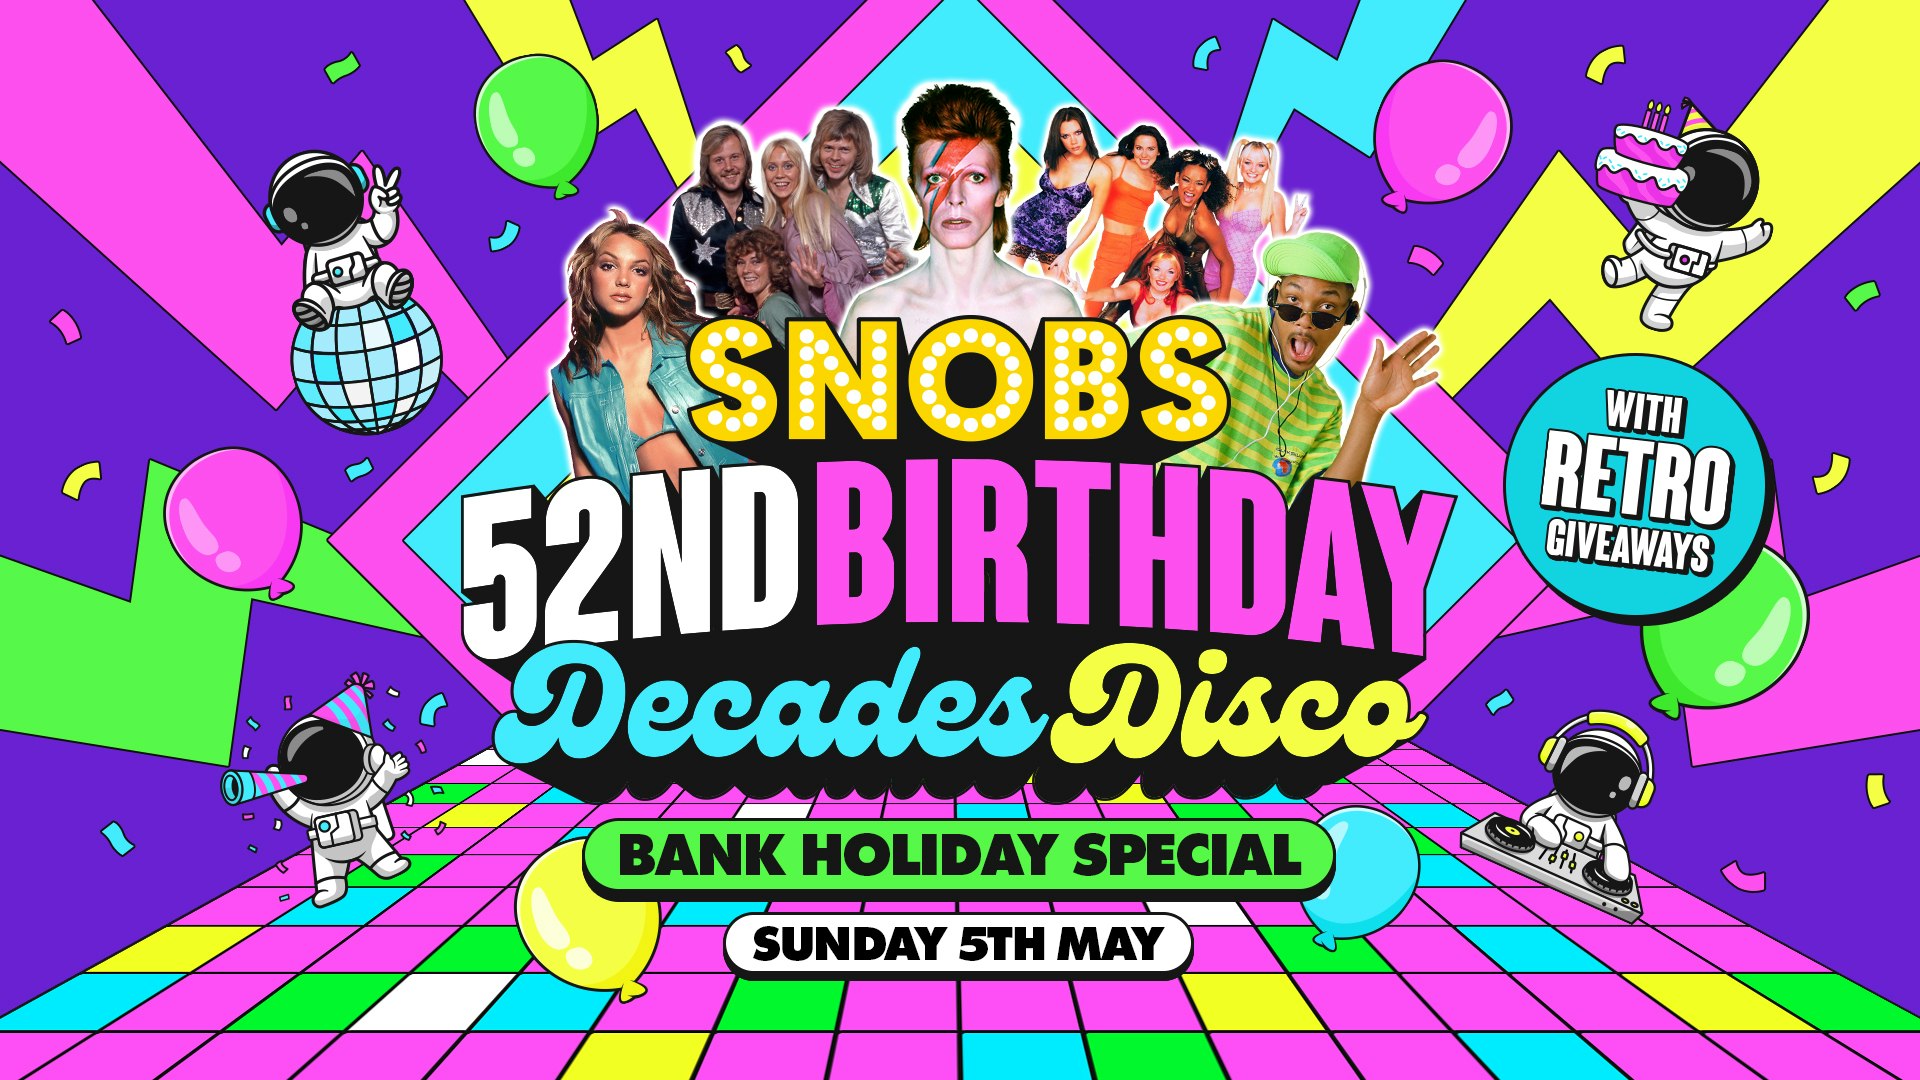 IT’S OUR BIRTHDAY!! 🎂 The Ultimate DECADES DISCO 🪩 BANK HOLIDAY SPECIAL 👾 5th May